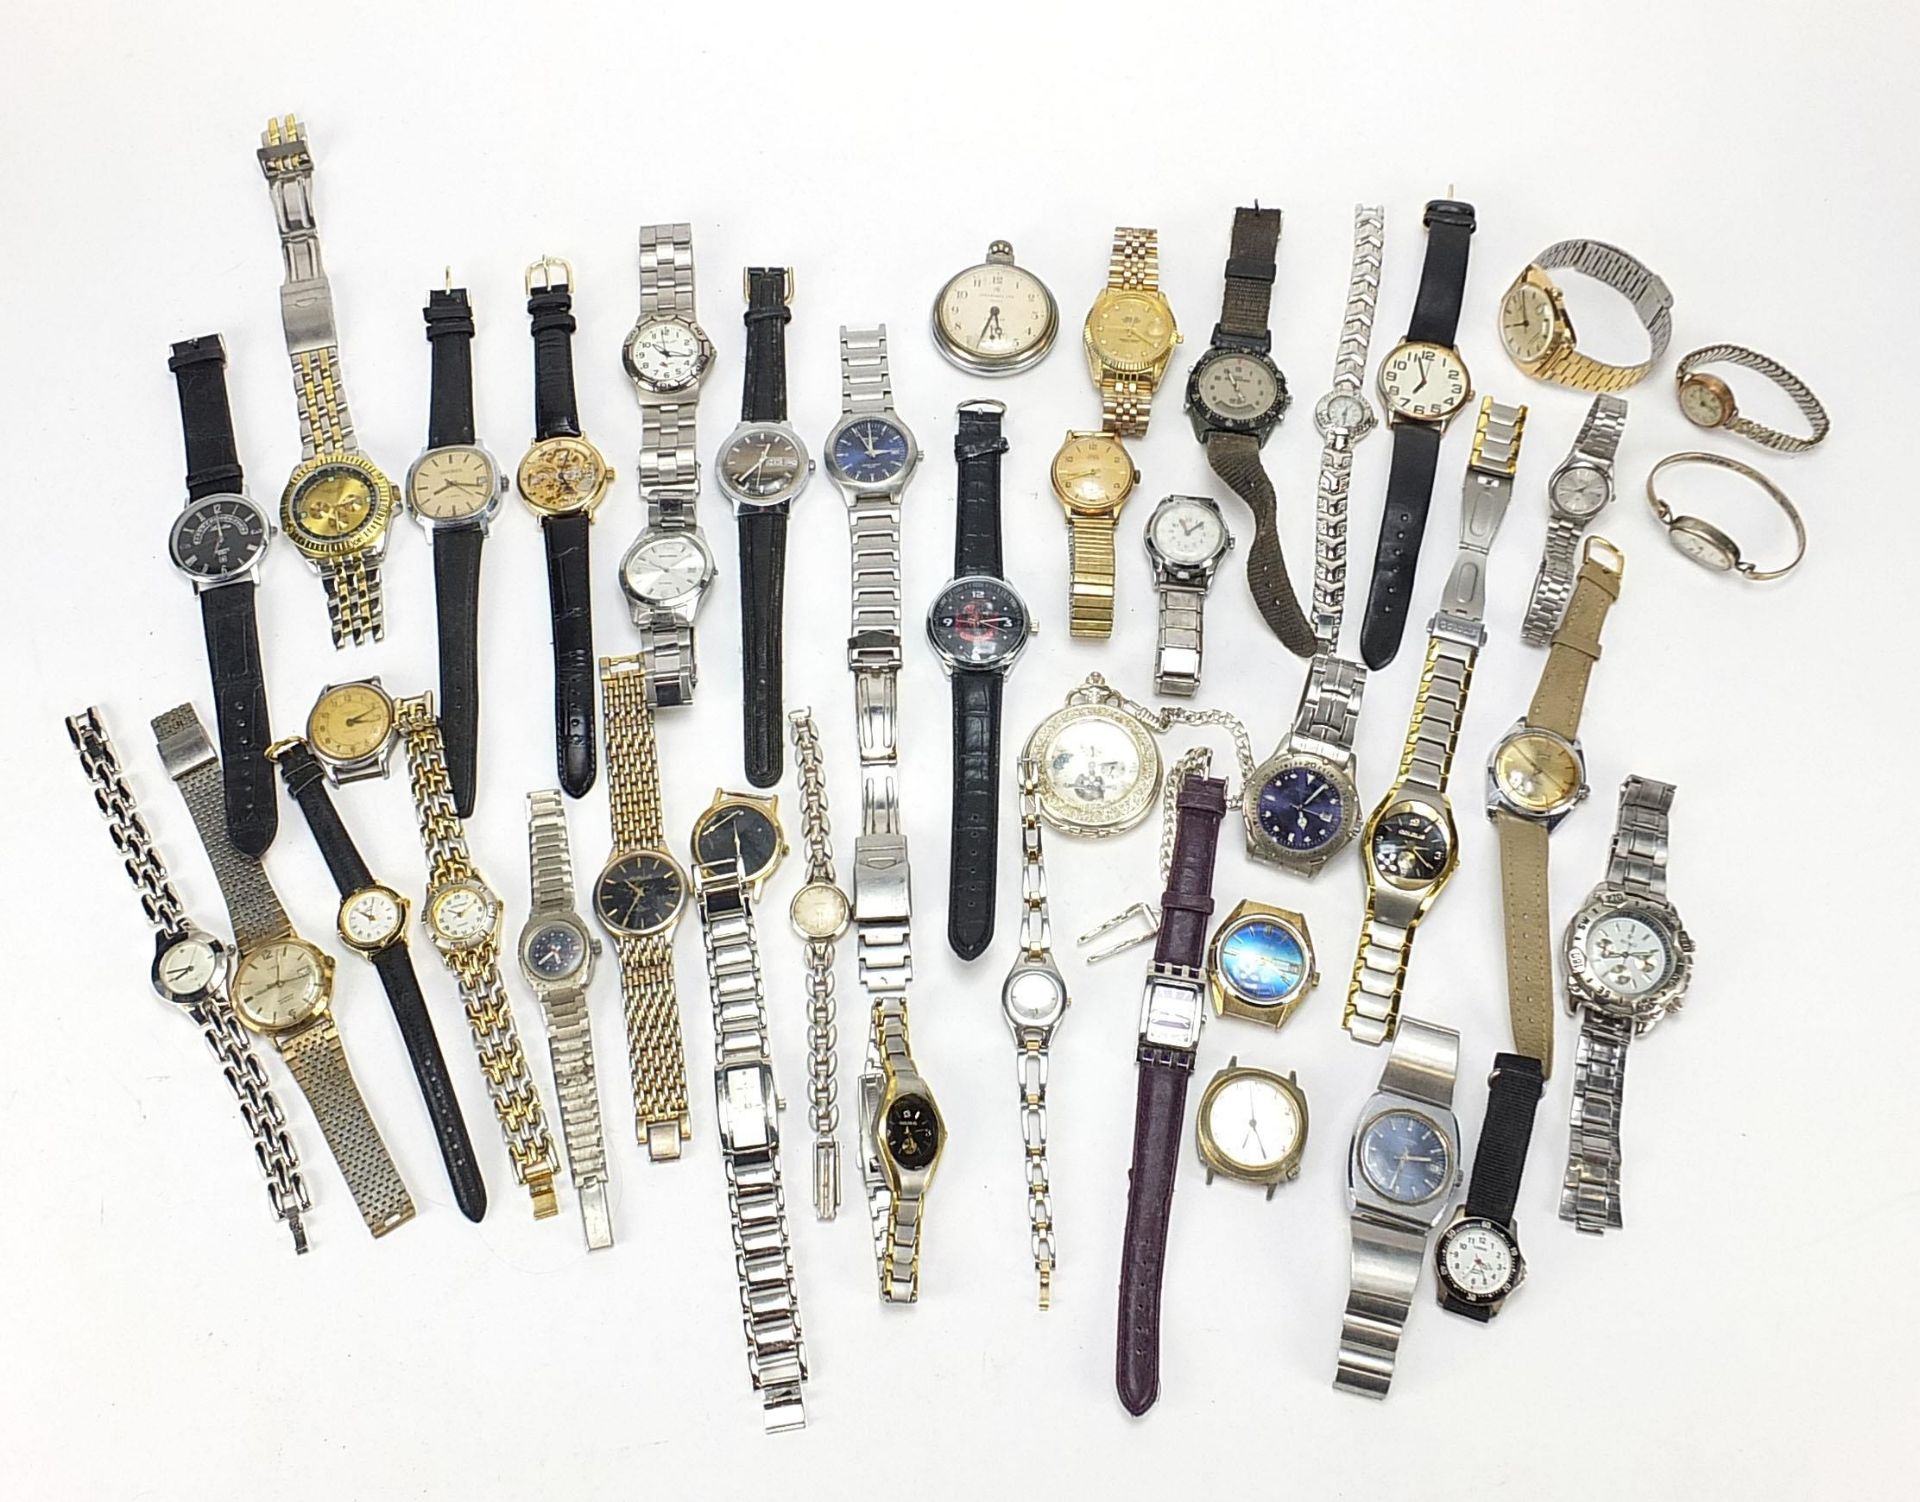 Vintage and later ladies' and gentlemen's wristwatches including Ingersoll, Timex, Sekonda and